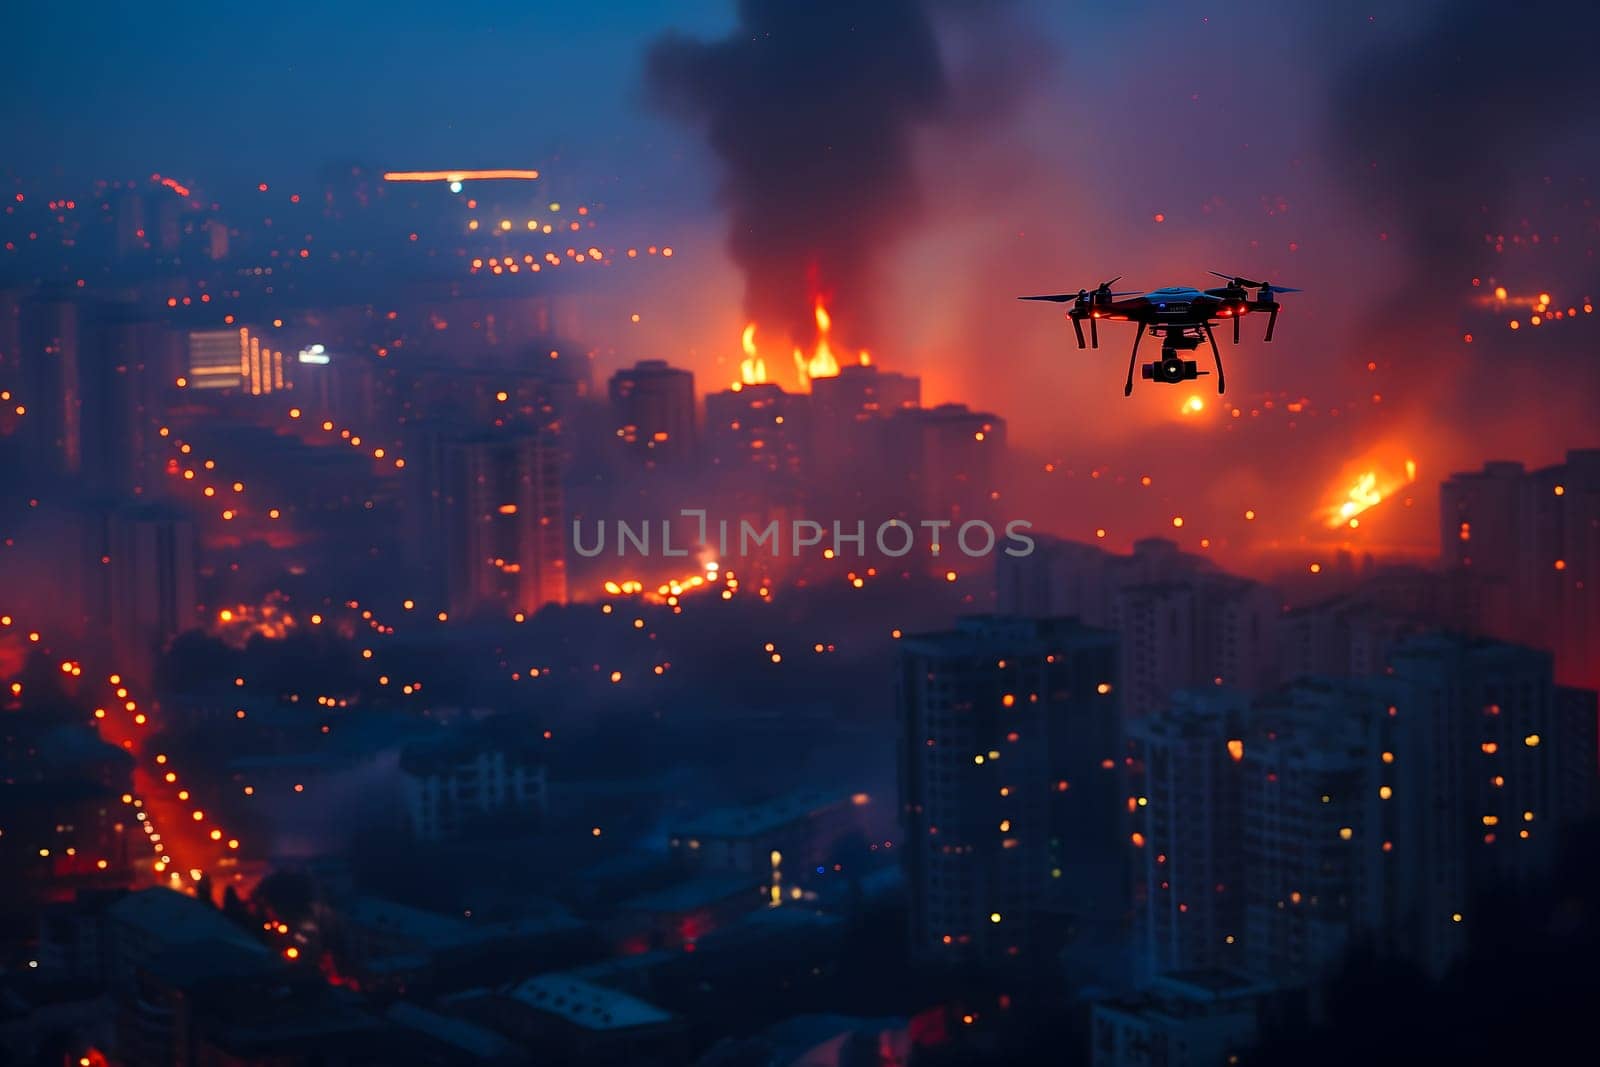 Copter drone over city at sunset or sunrise by z1b